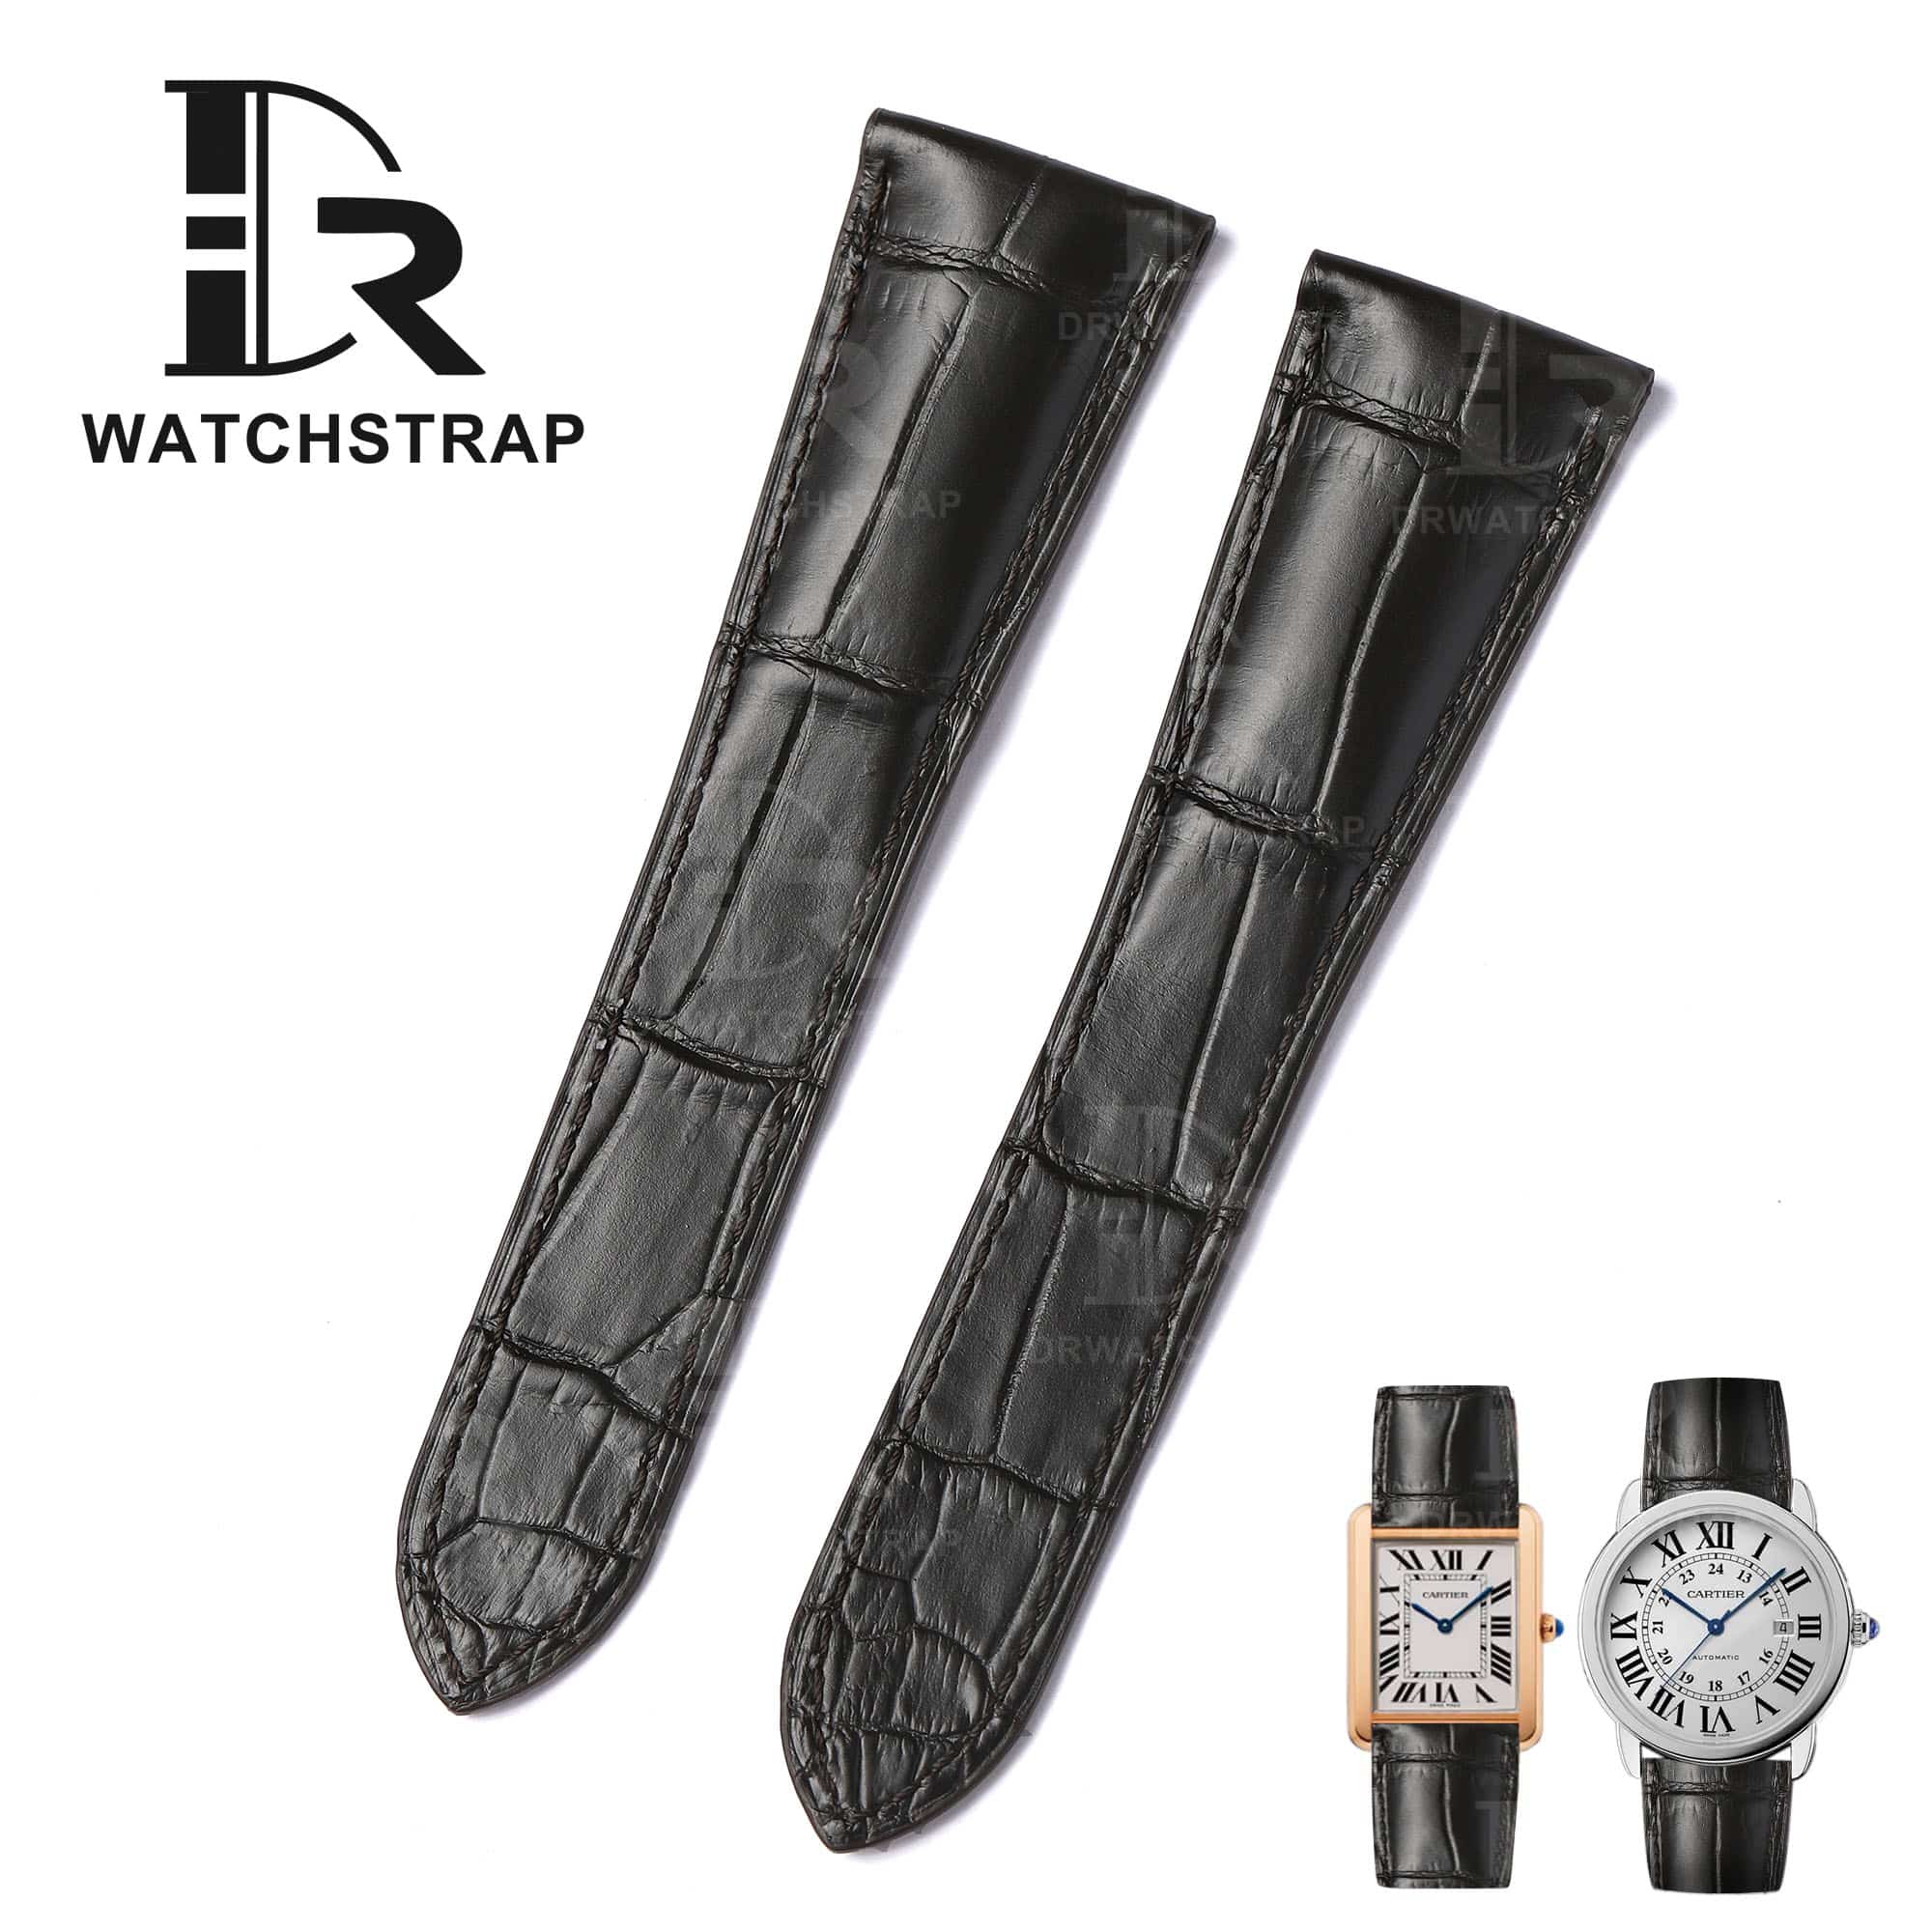 Genuine best quality custom aftermarket handmade Black Alligator Square scale leather straps and watch bands replacement for Cartier American tank, France tank, Must, Ronde, Cle de, and more models from DR watchstrap - Shop the premium Crocodile leather Cartier strap and watchband at a discount price